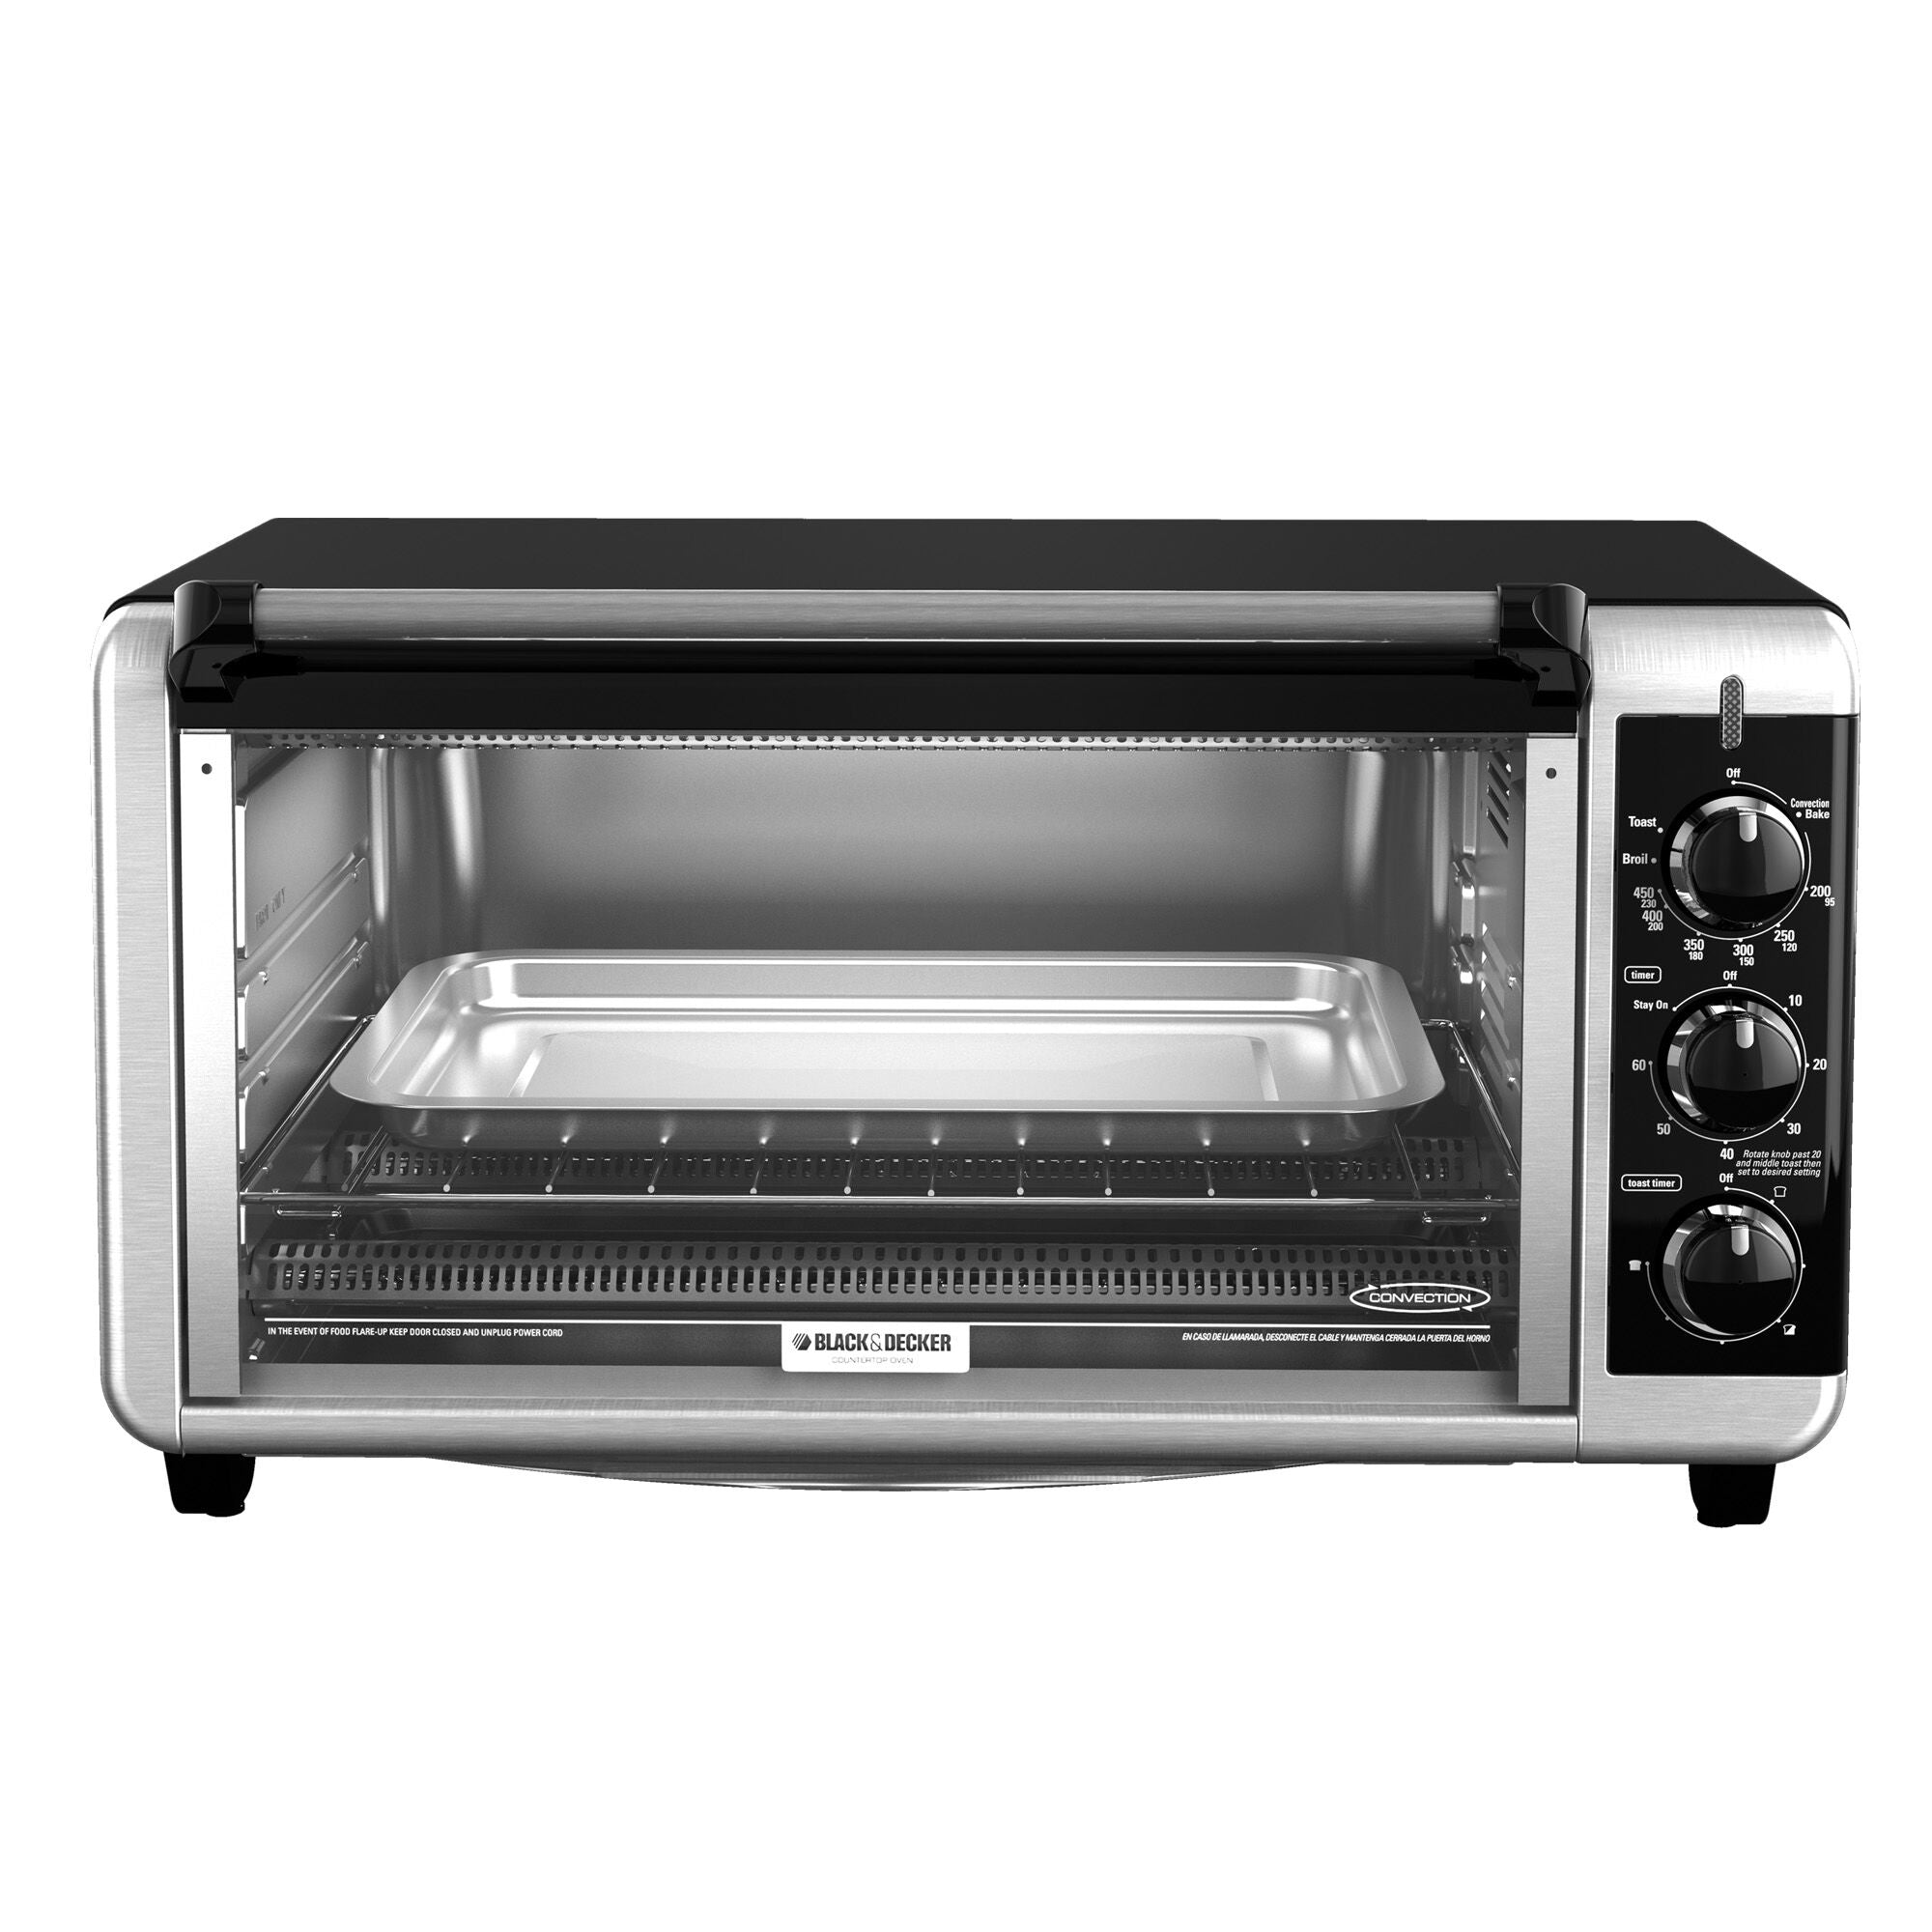 Black+Decker TO3250XSB Toaster & Toaster Oven Review - Consumer Reports